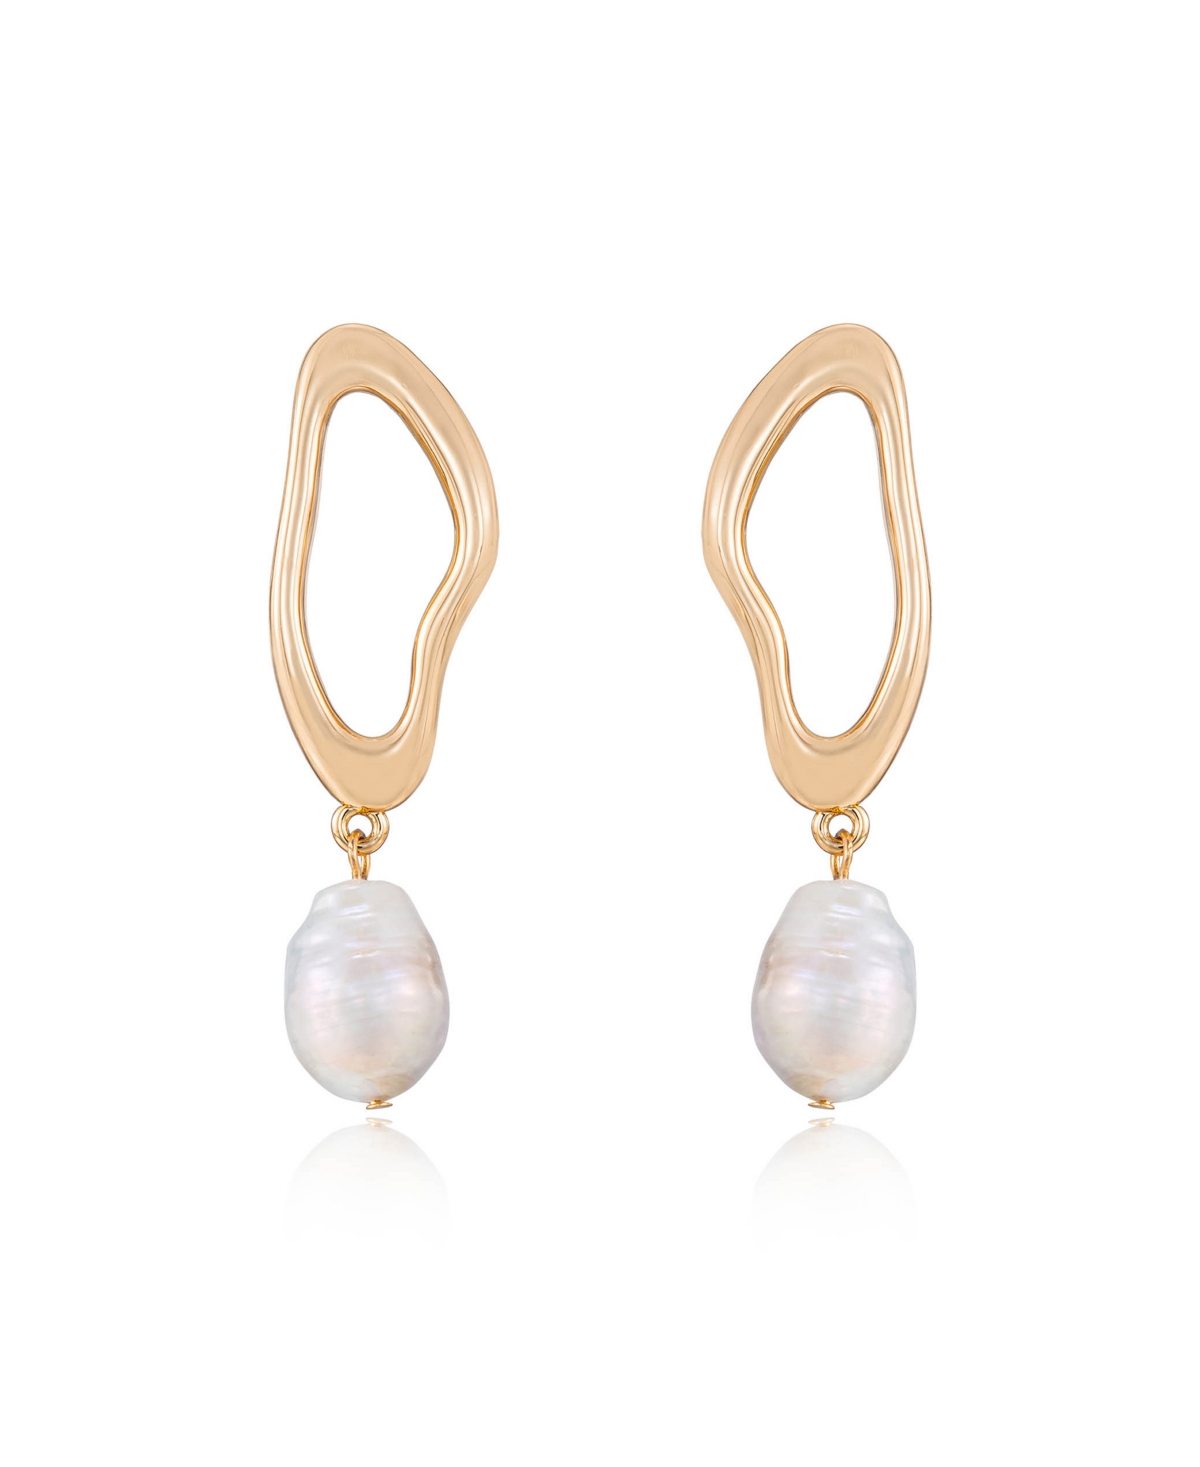 Open Circle 18K Gold-Plated and Cultured Freshwater Pearl Dangle Earrings - Gold